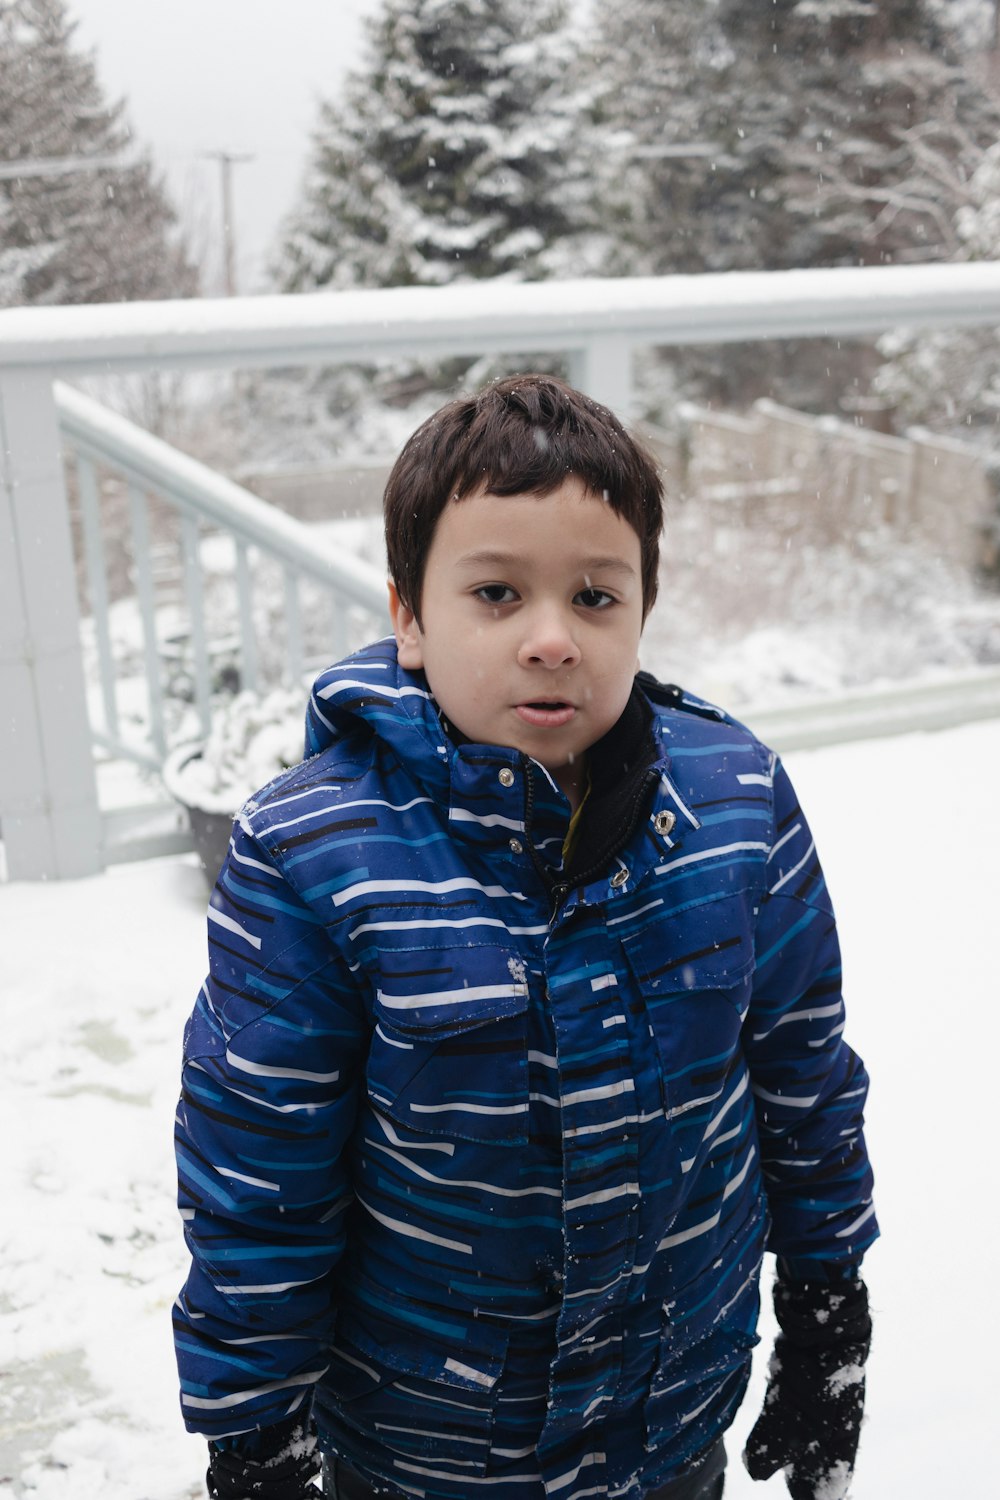 a young boy standing in the snow wearing a blue jacket